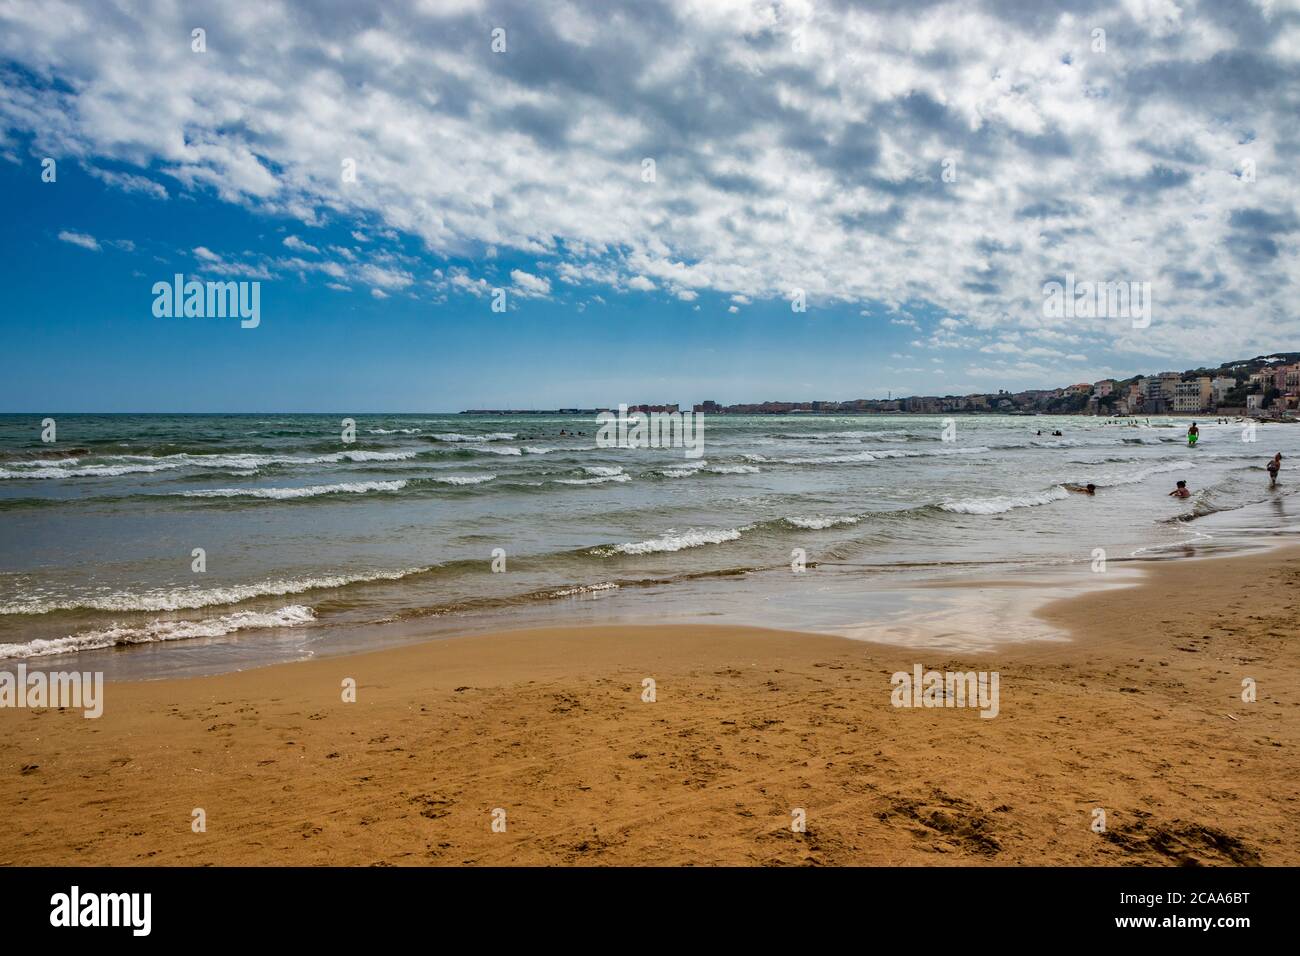 Nettuno, Lazio, Rome, Italy - Some people bathe, play and relax in the water, in the Roman sea. Reflections of light on the water. Cloudy blue sky at Stock Photo